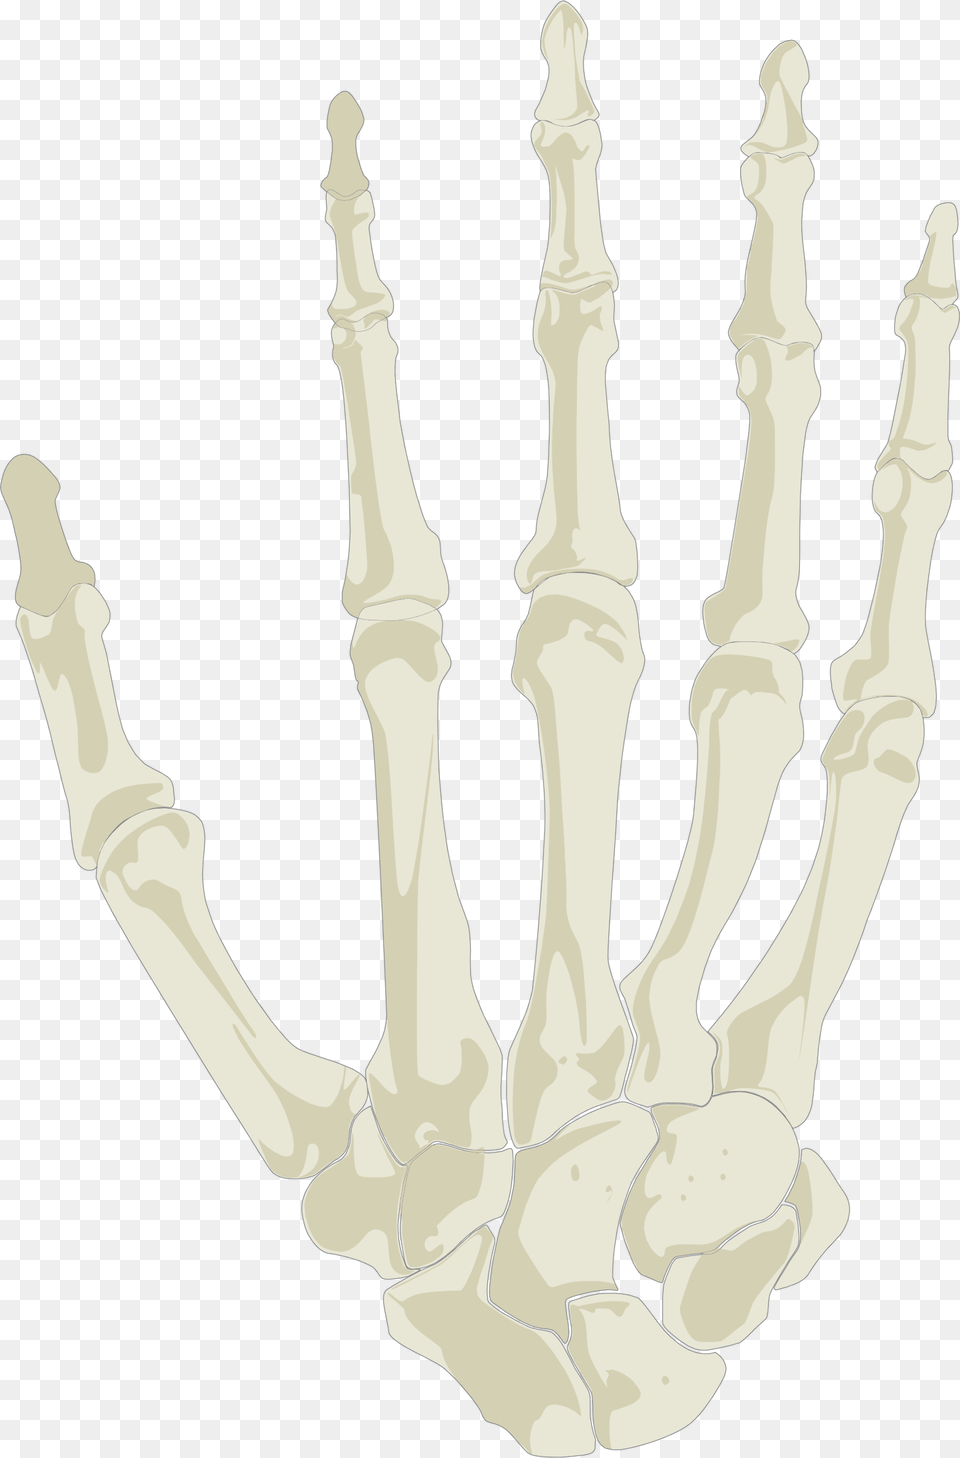 This Icons Design Of Hand Skeleton, Chess, Game Free Png